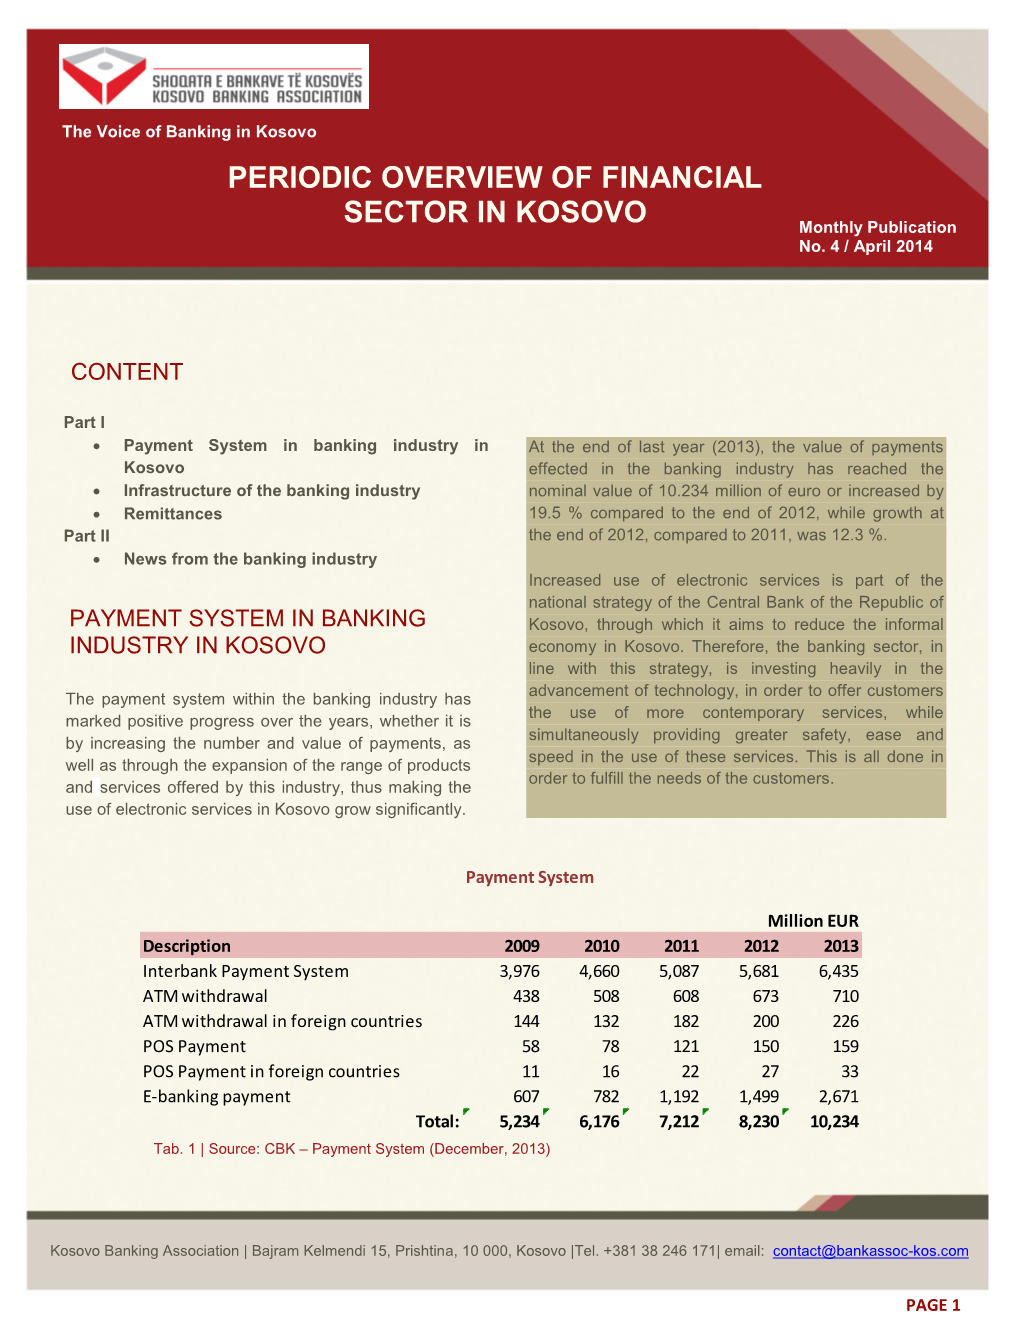 Periodic Overview of Financial Sector in Kosovo